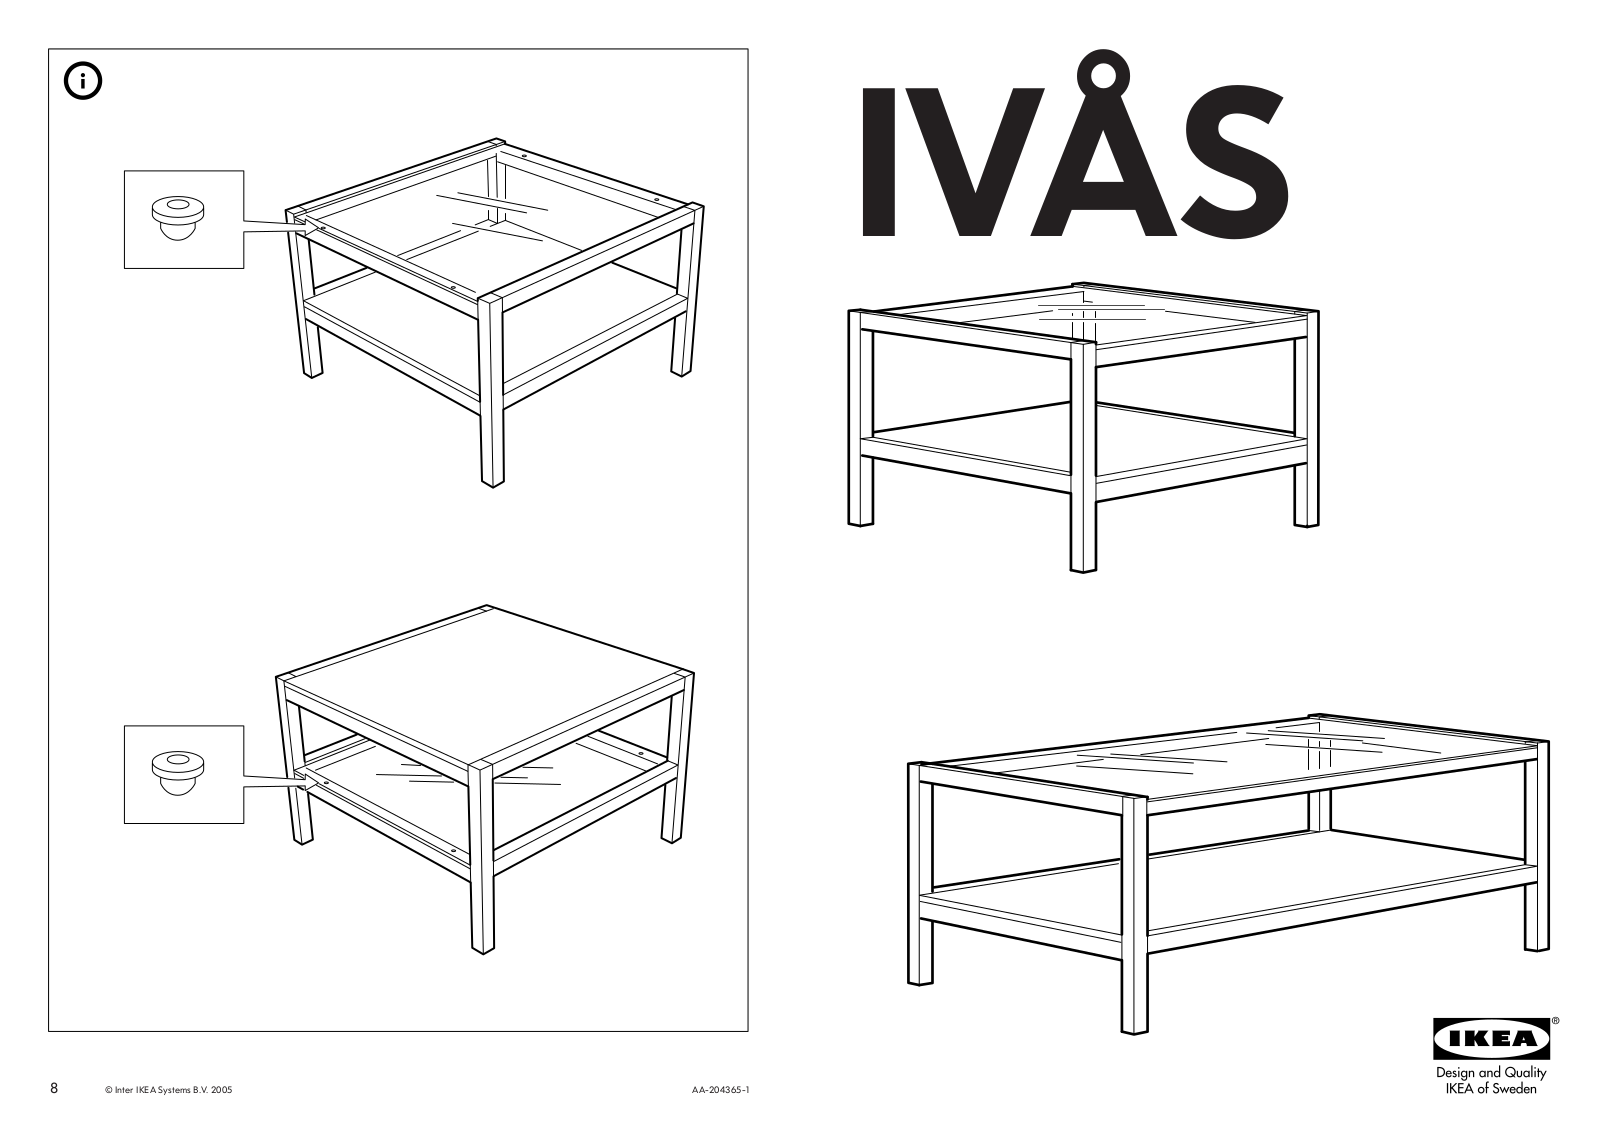 IKEA IVÃS SIDE TABLE 28X28, IVÃS COFFEE TABLE 47X28 Assembly Instruction